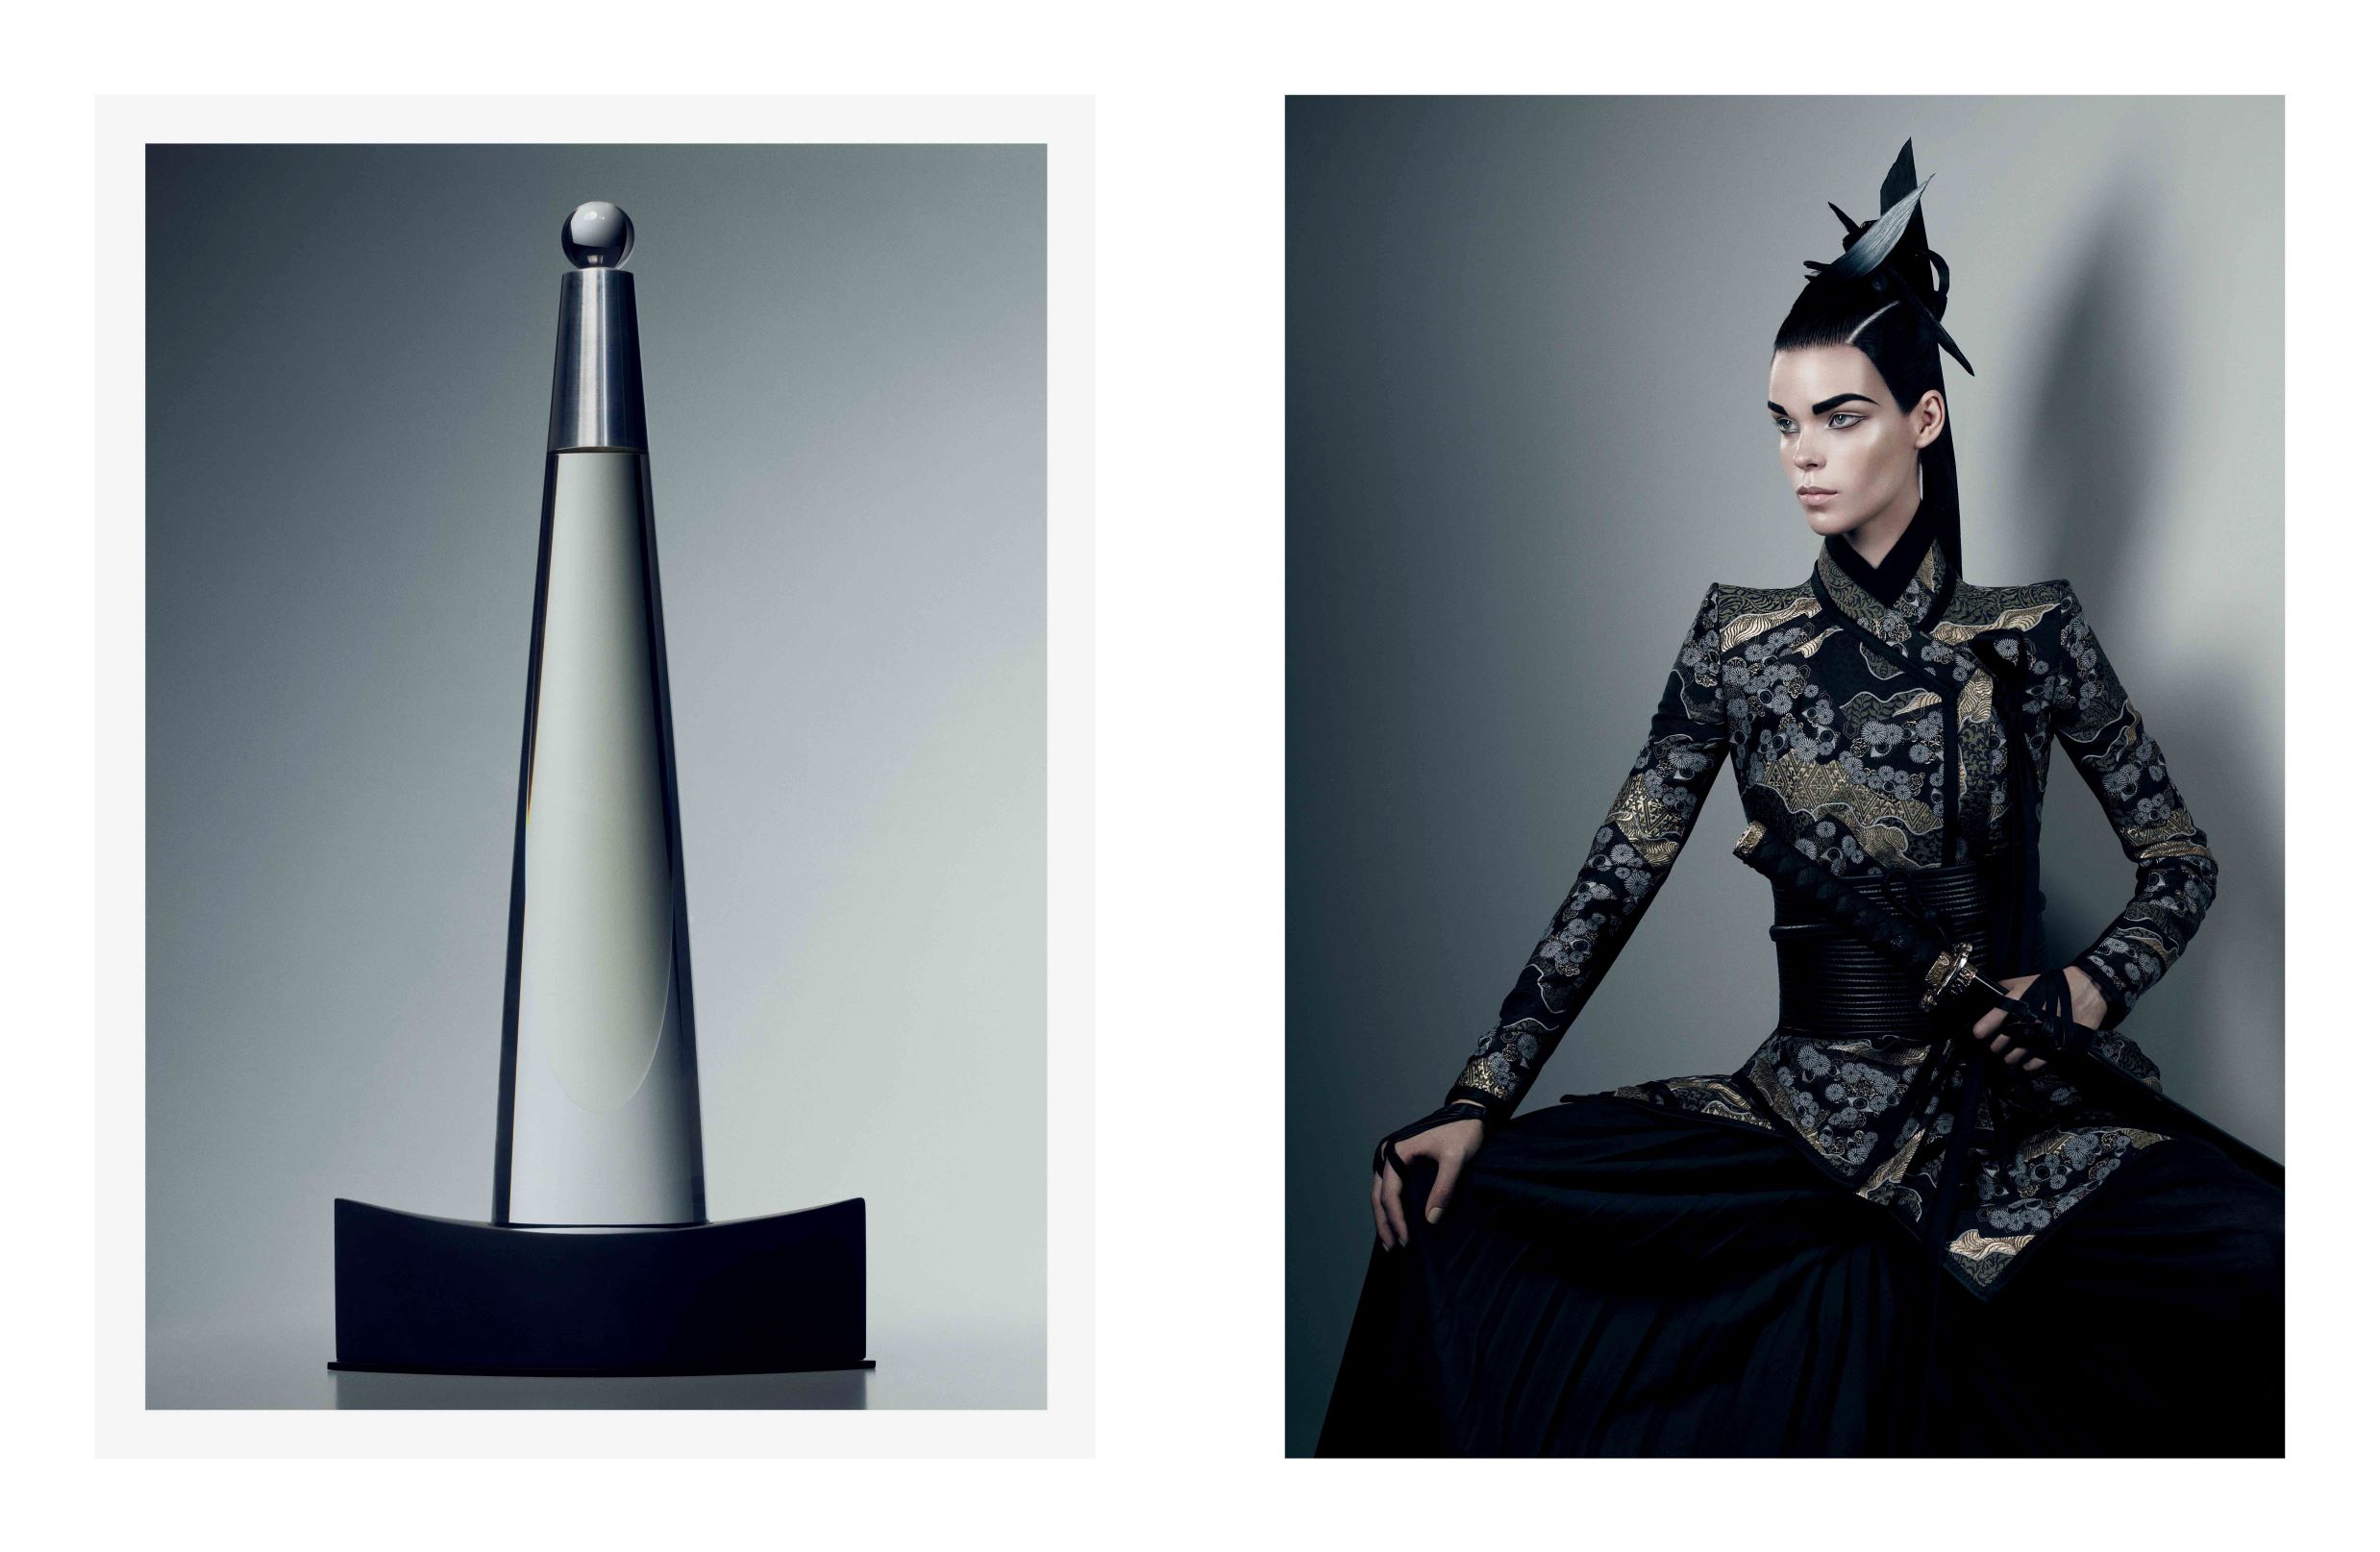 Issey Miyake L’Eeu d’Issey, product design, 1992, photography Frederik Lieberath (left), Interview, photography, 2012 (right).